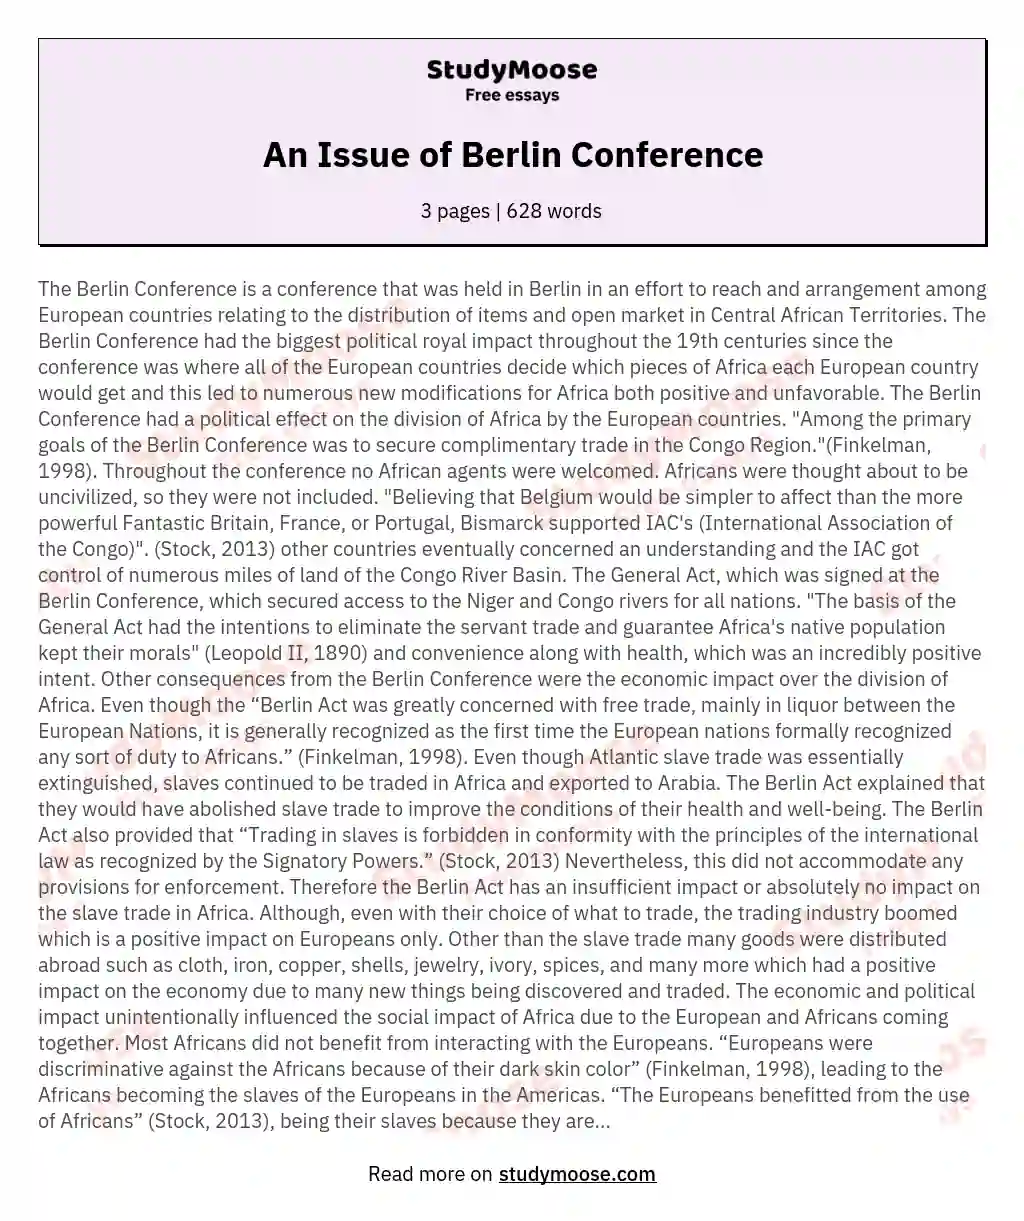 An Issue of Berlin Conference essay